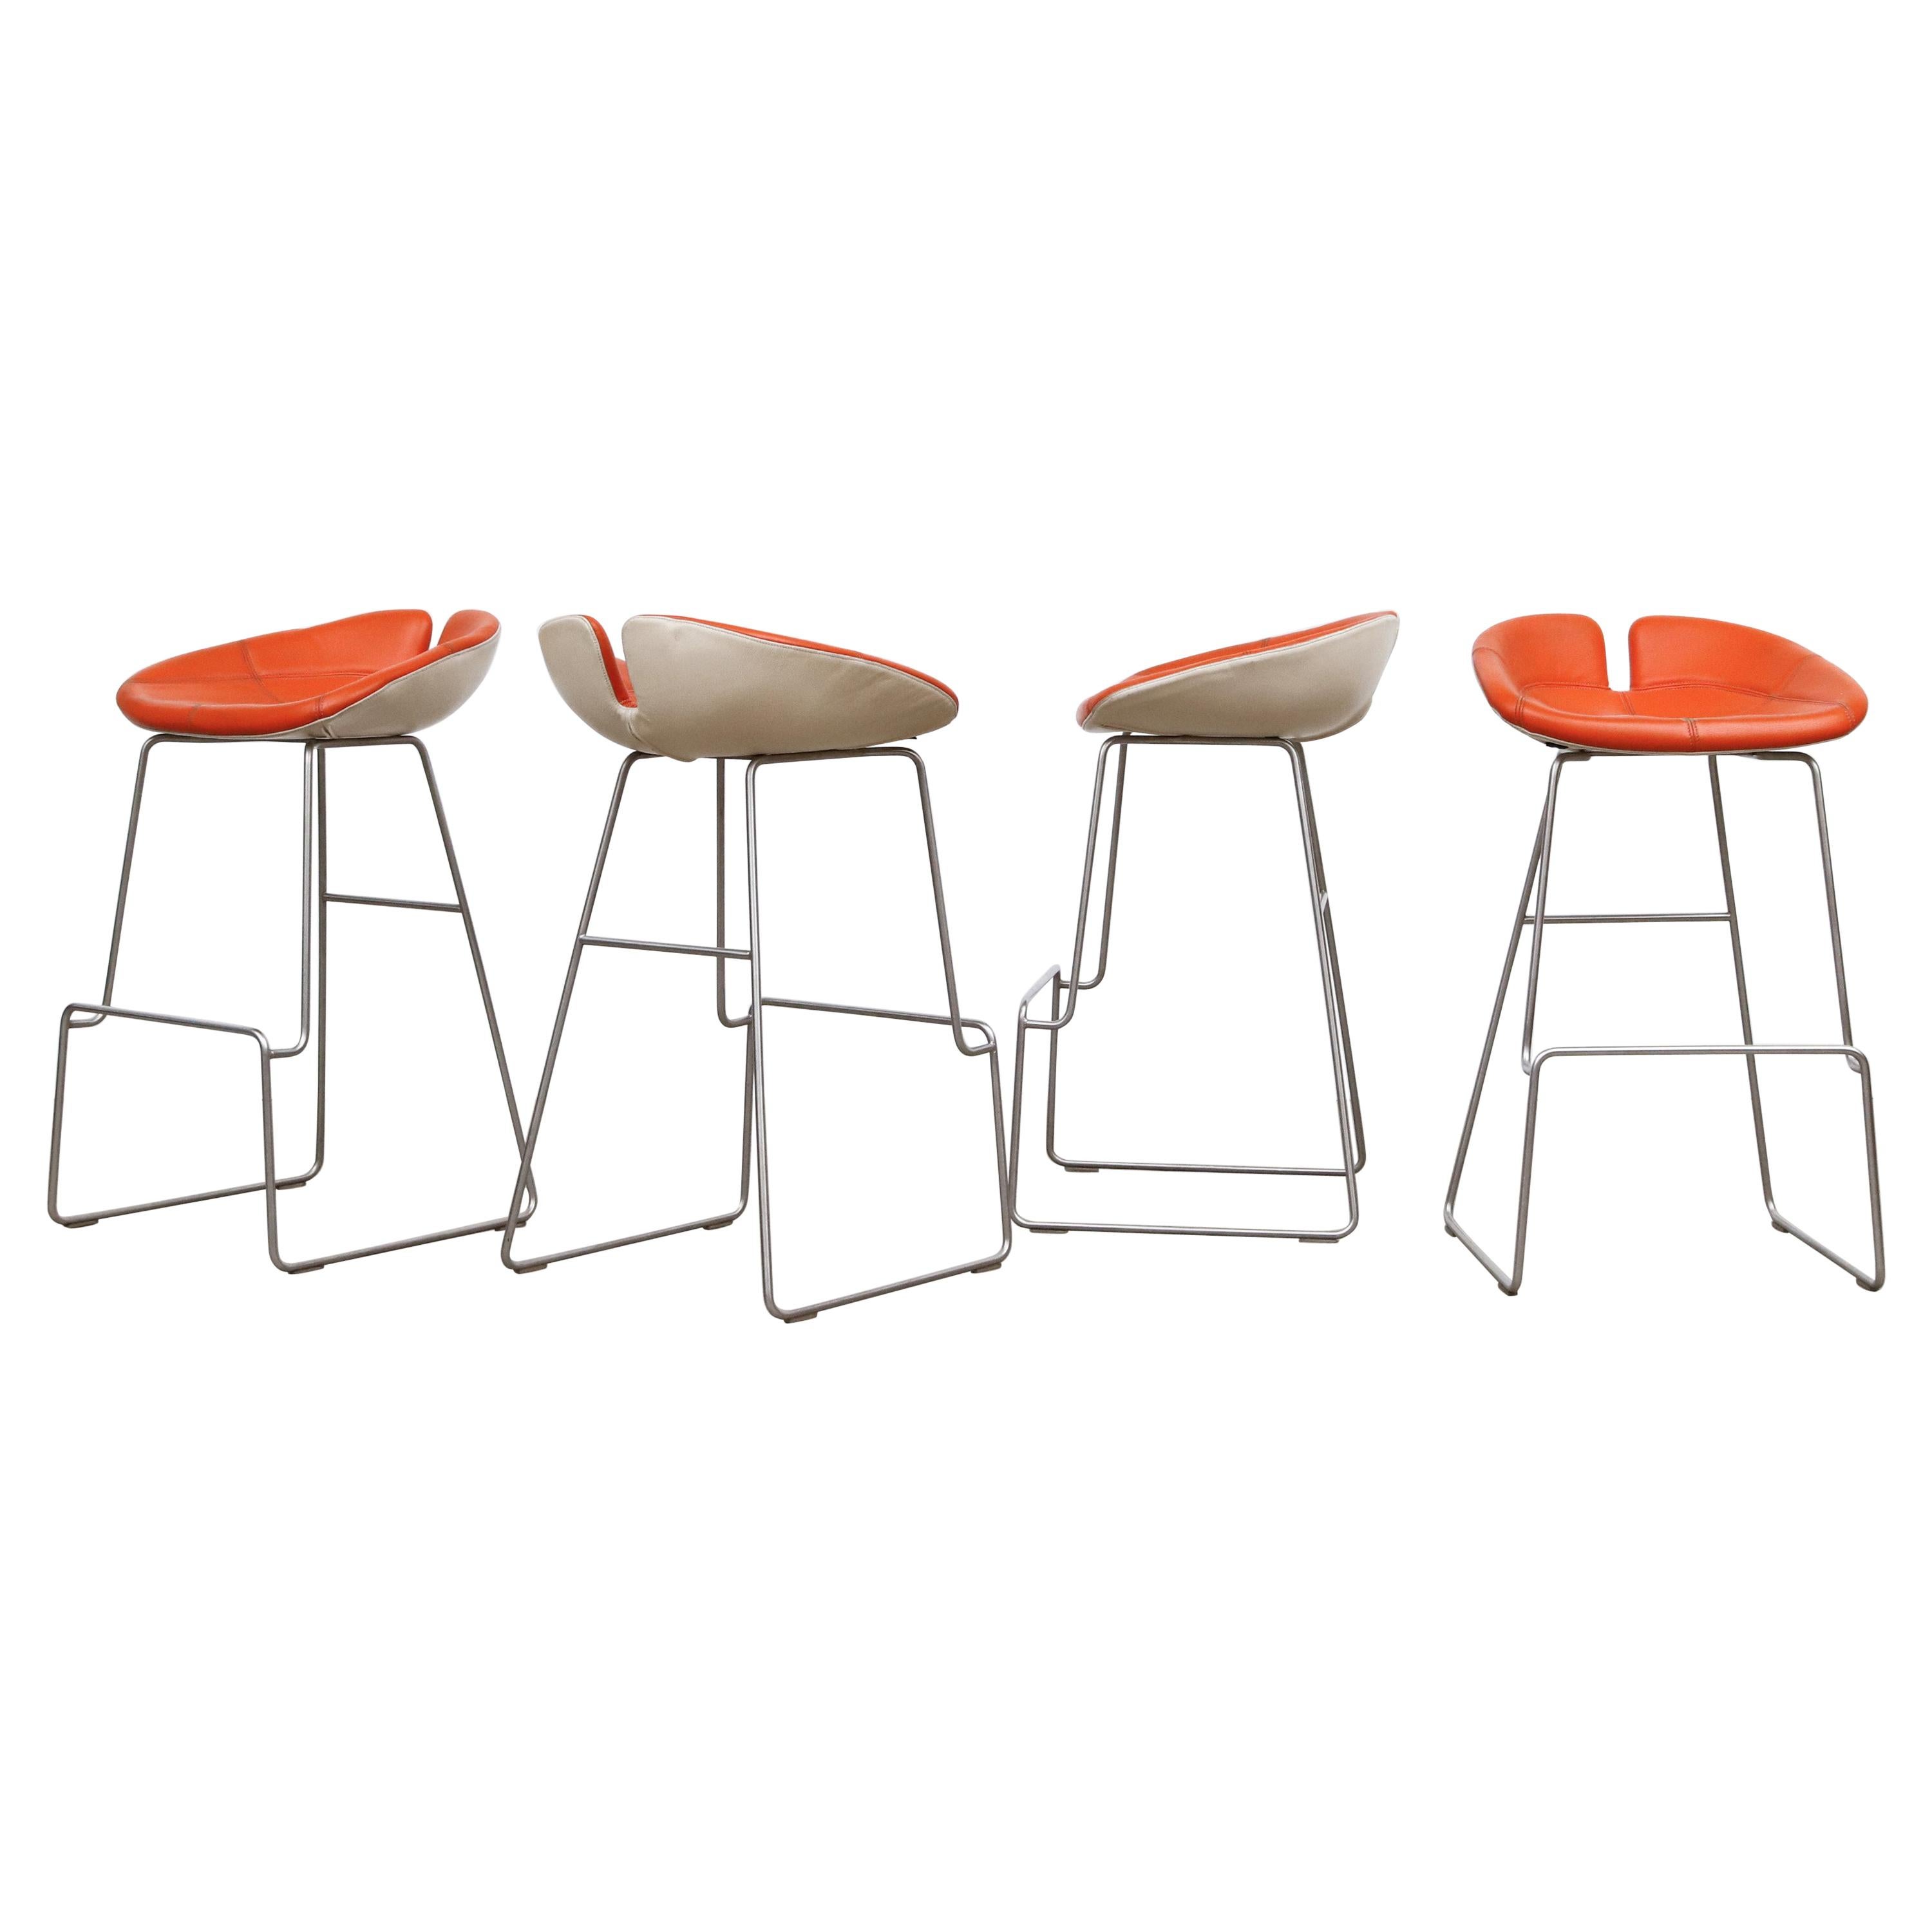 Set of 4 Fjord Leather Bar Stools by Patricia Urquiola for Moroso